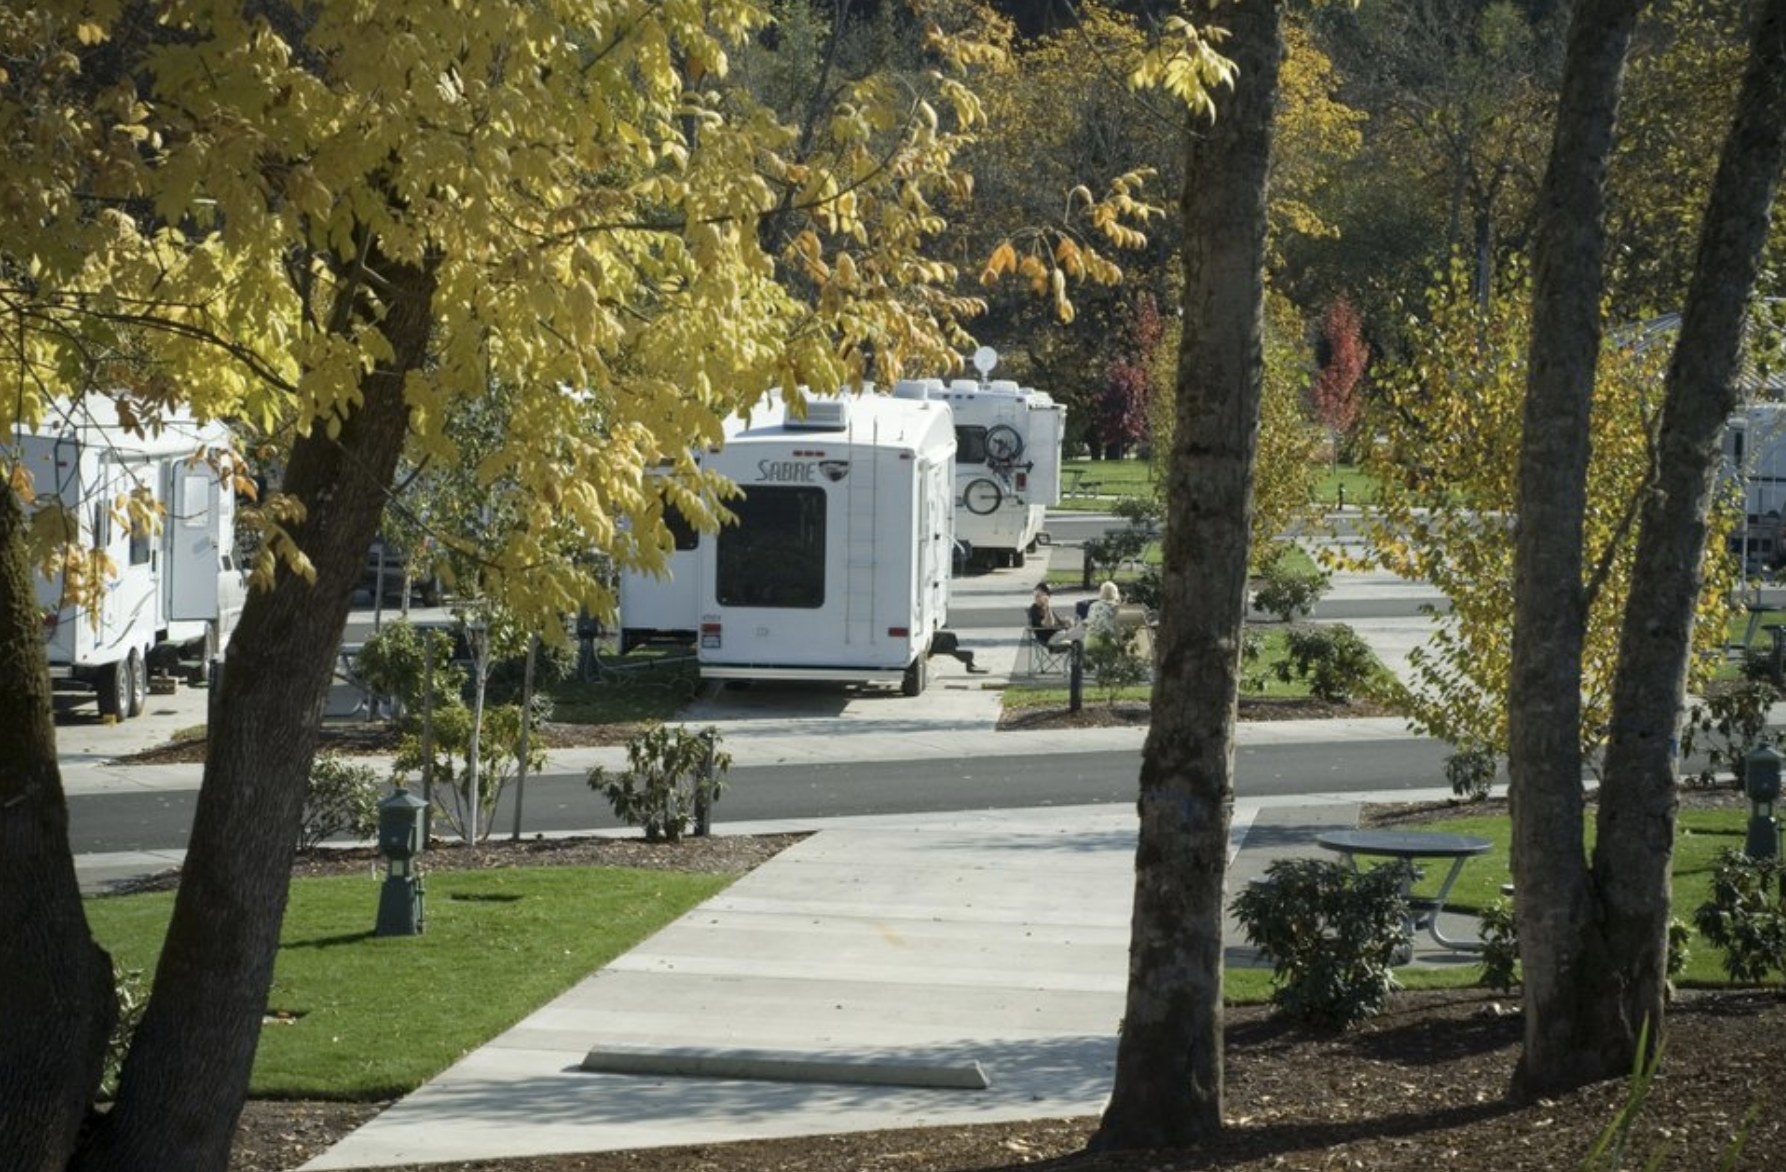 RVs parked in spaces under trees